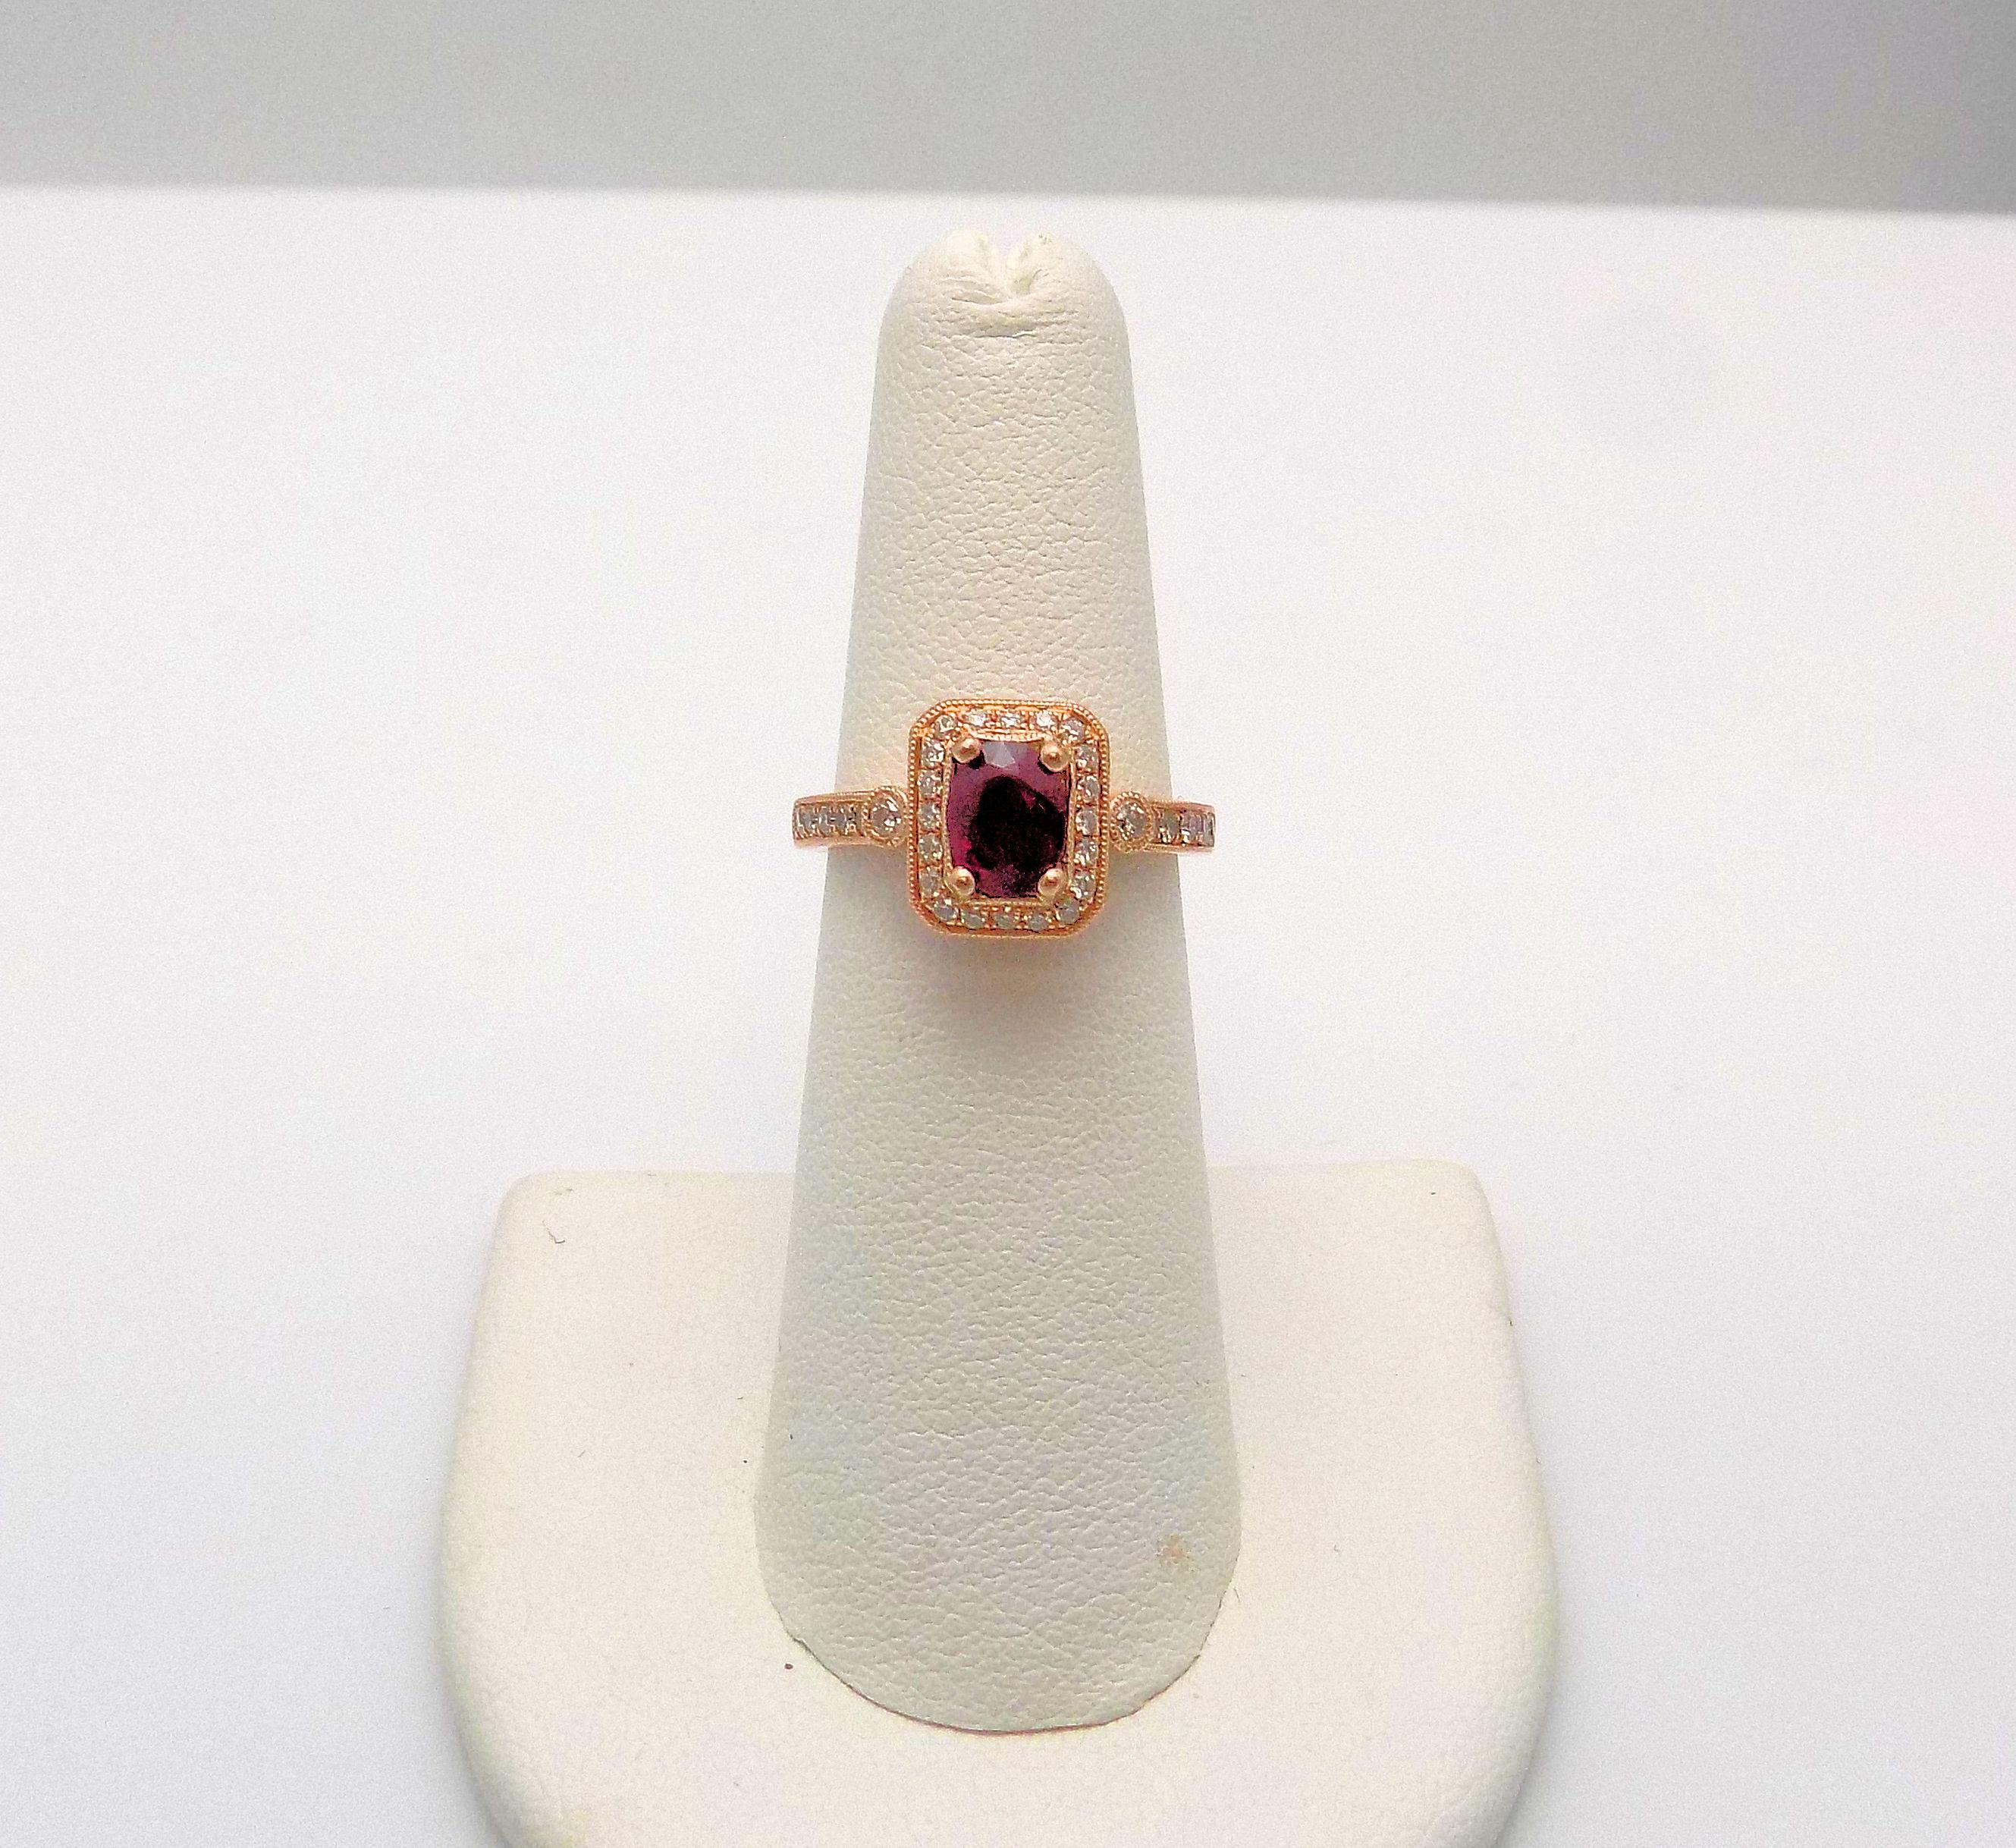 14 Karat Rose Gold Ring featuring 1 Oval Ruby 0.70 Carat; 32 Round Brilliant Diamonds 0.25 Carat Total Weight, SI, H; Ring Size/Finger Size 6; 2.7 DWT or 4.20 Grams.